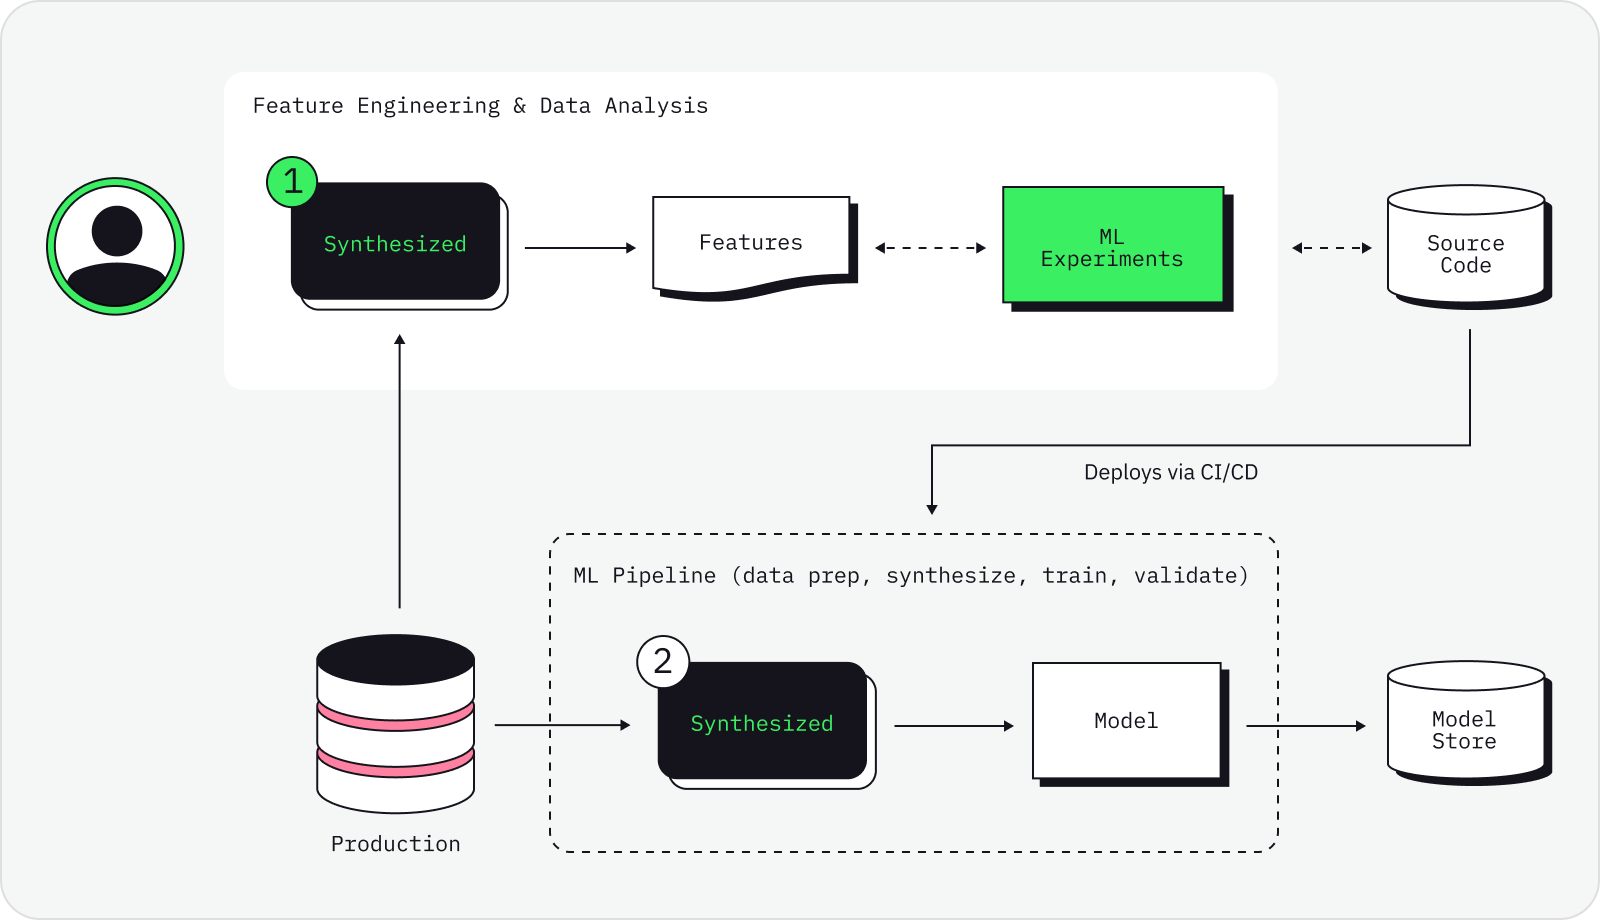 Where the SDK fits in a data pipeline